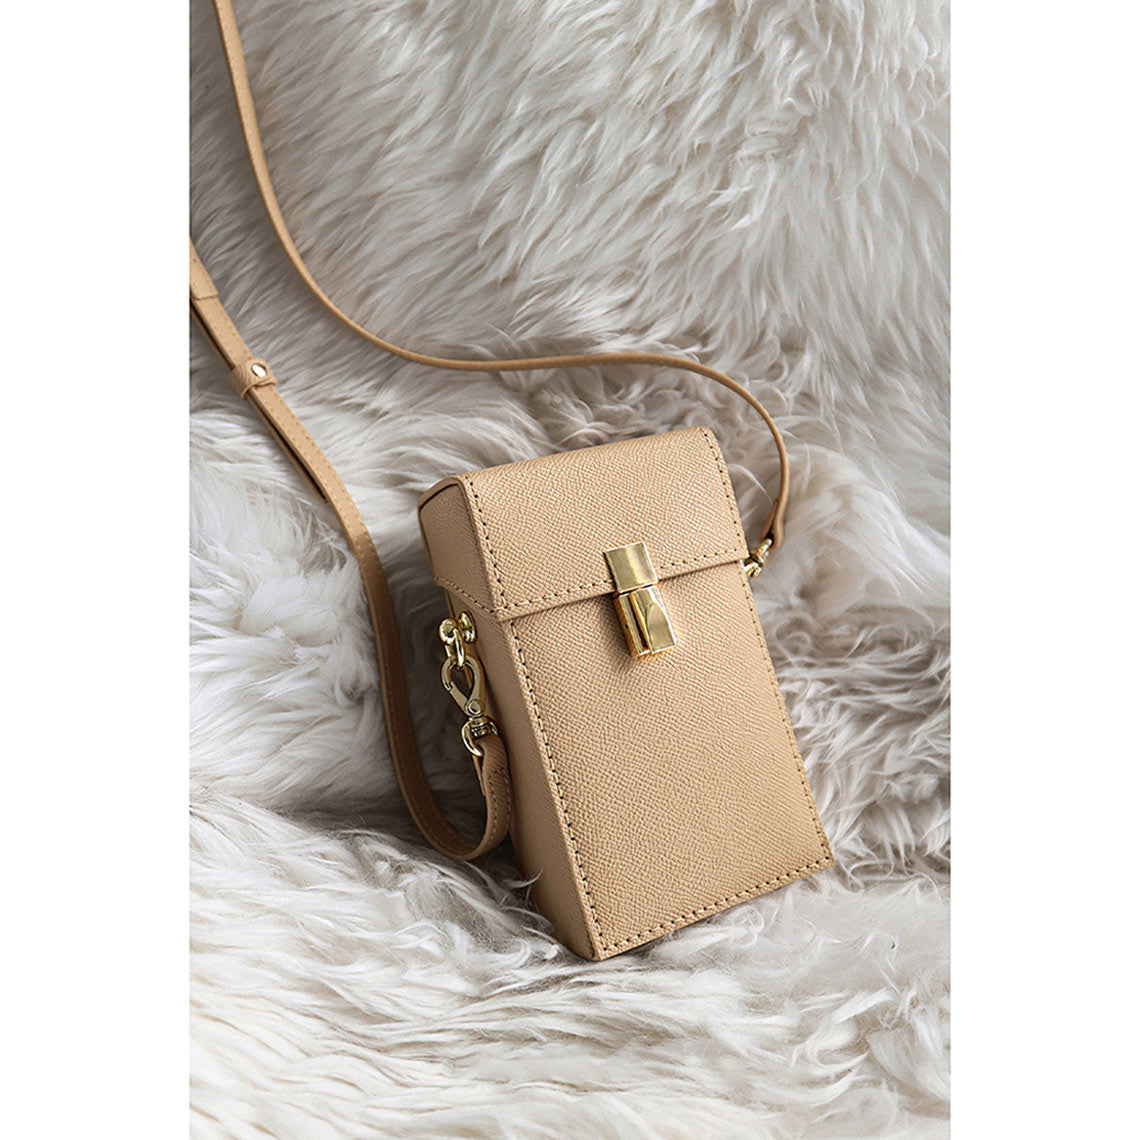 Leather Phone Bag in Beige | Small Crossbody Bag DIY Kit - POPSEWING™